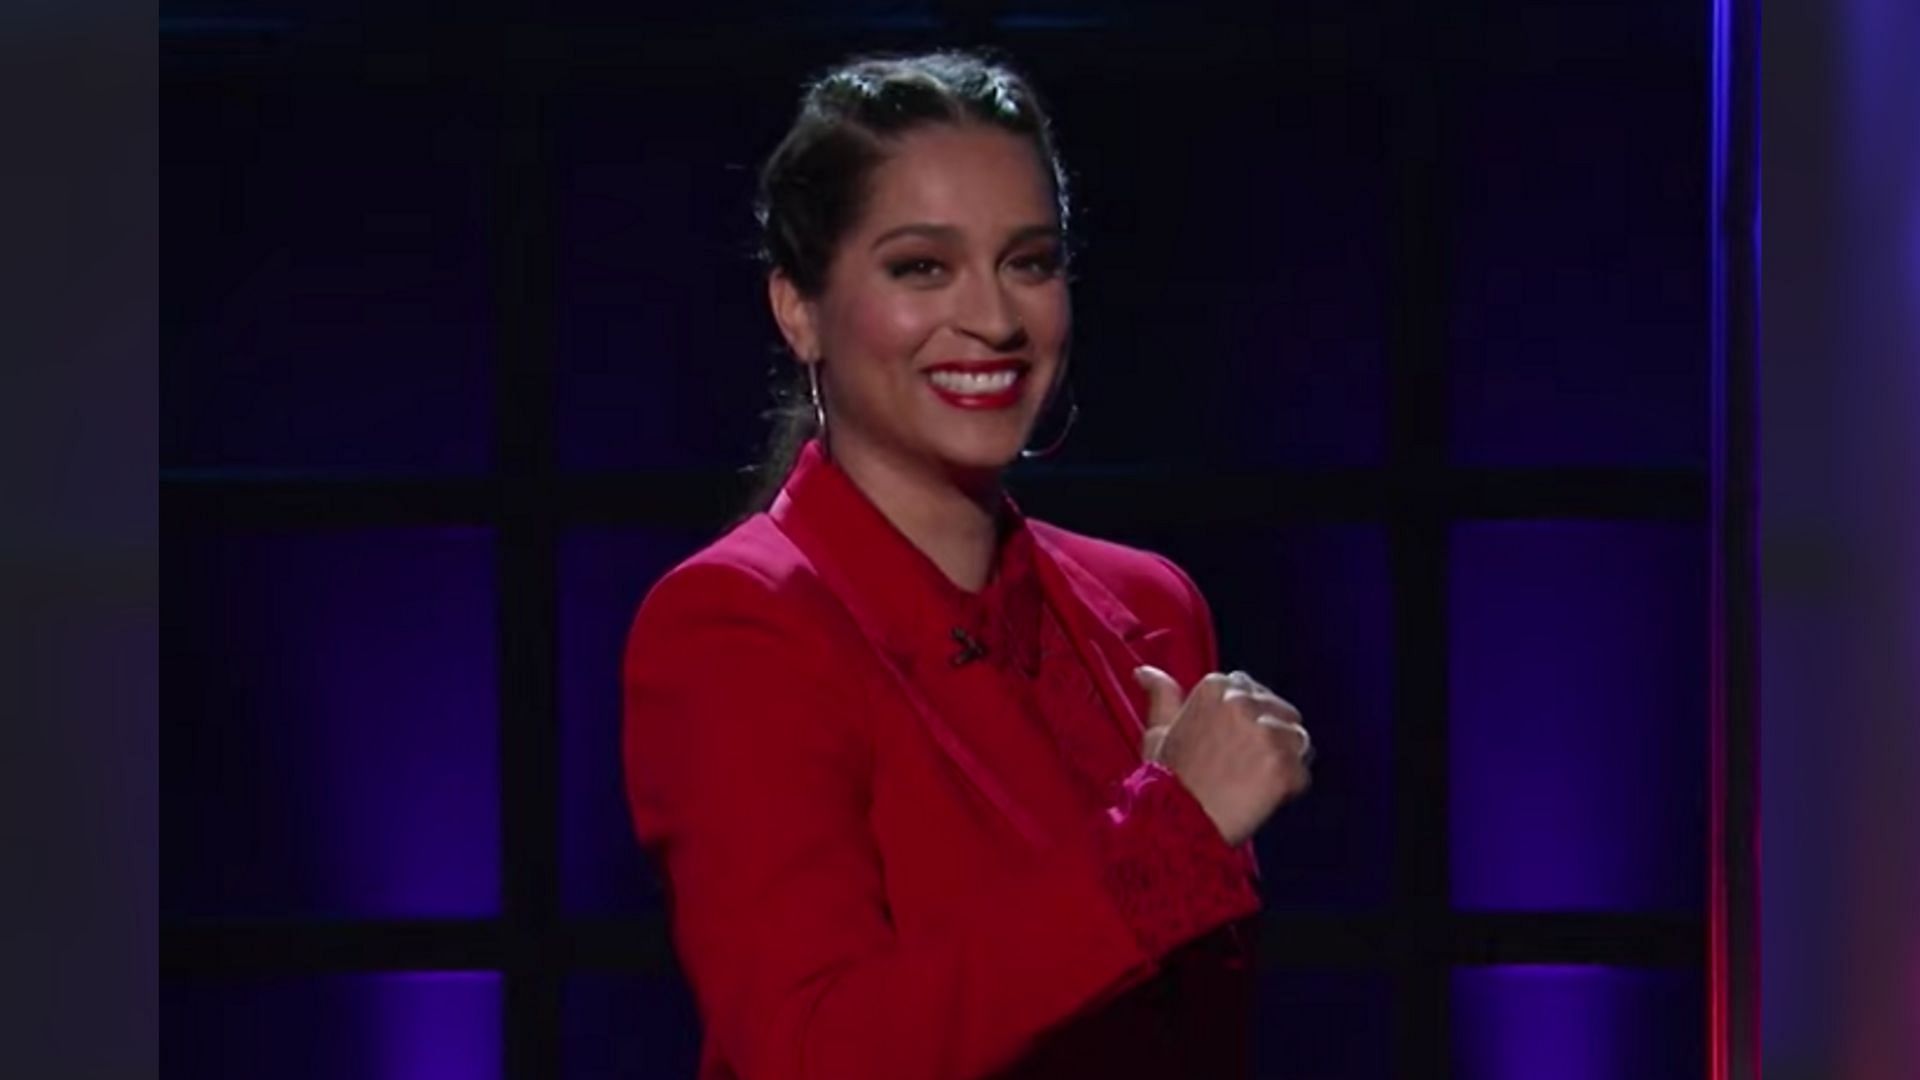 Lilly Singh hosting the first episode of her talkshow <i>A Little Late With Lilly Singh</i>.